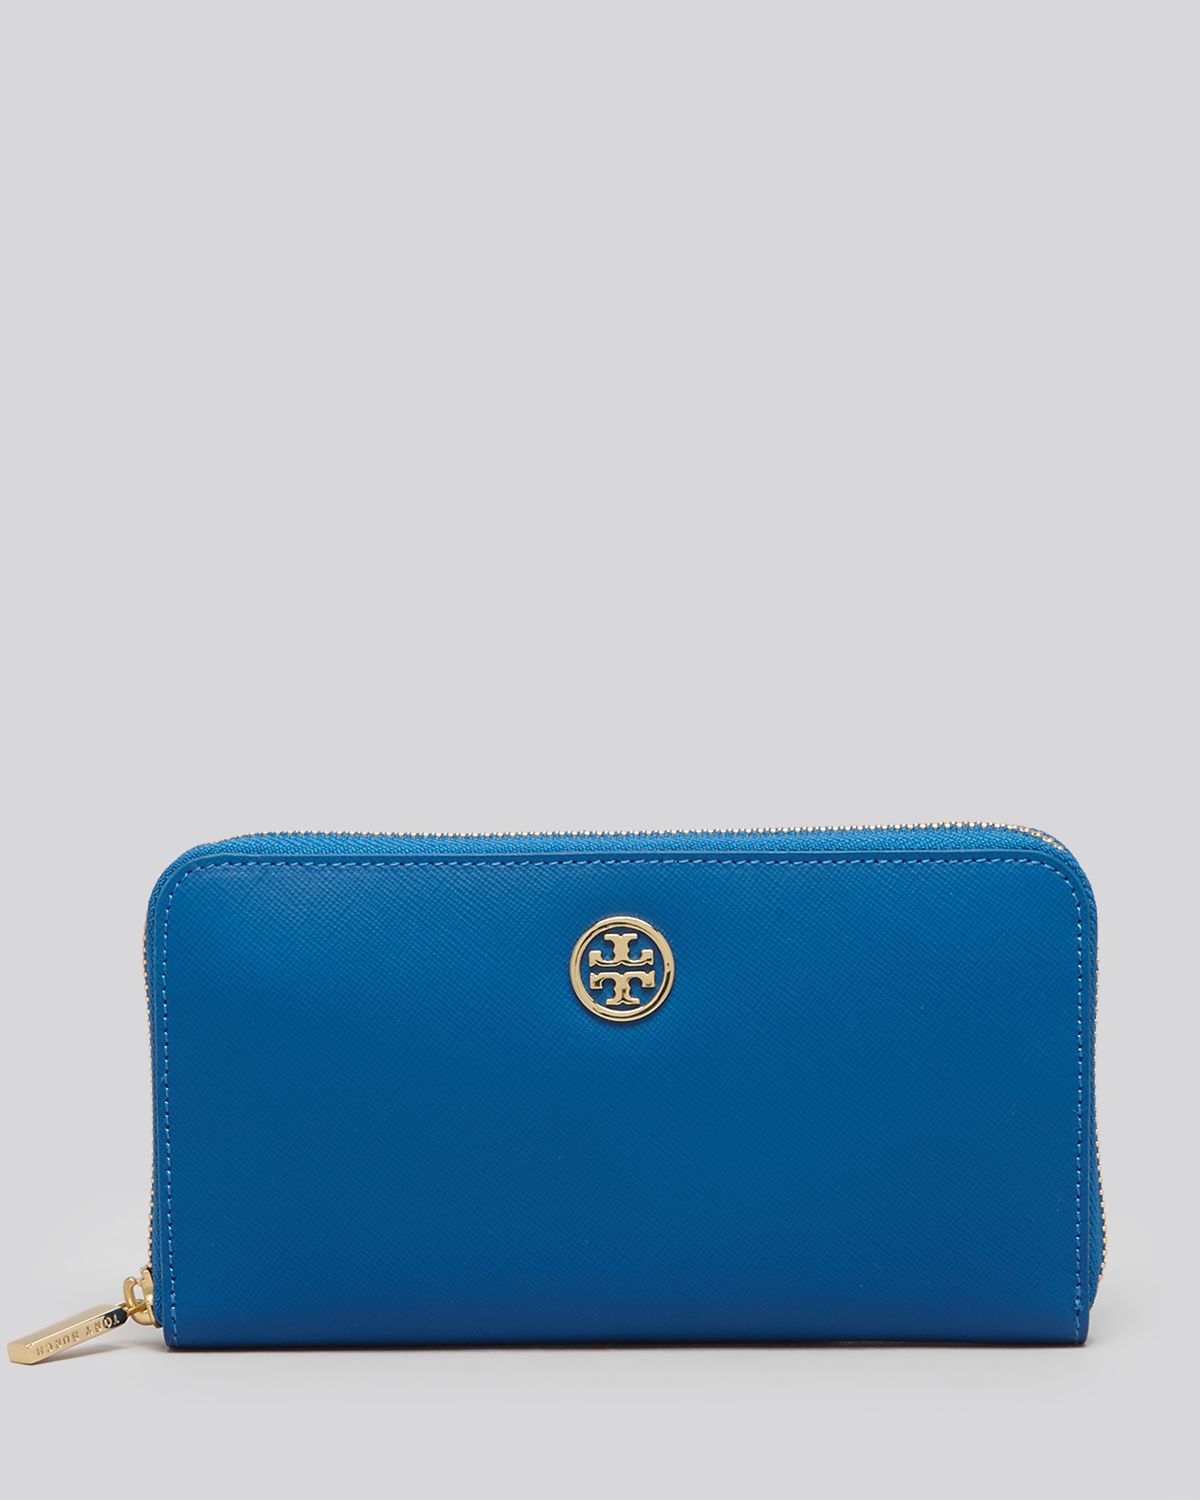 Lyst - Tory burch Wallet Robinson Zip Continental in Blue